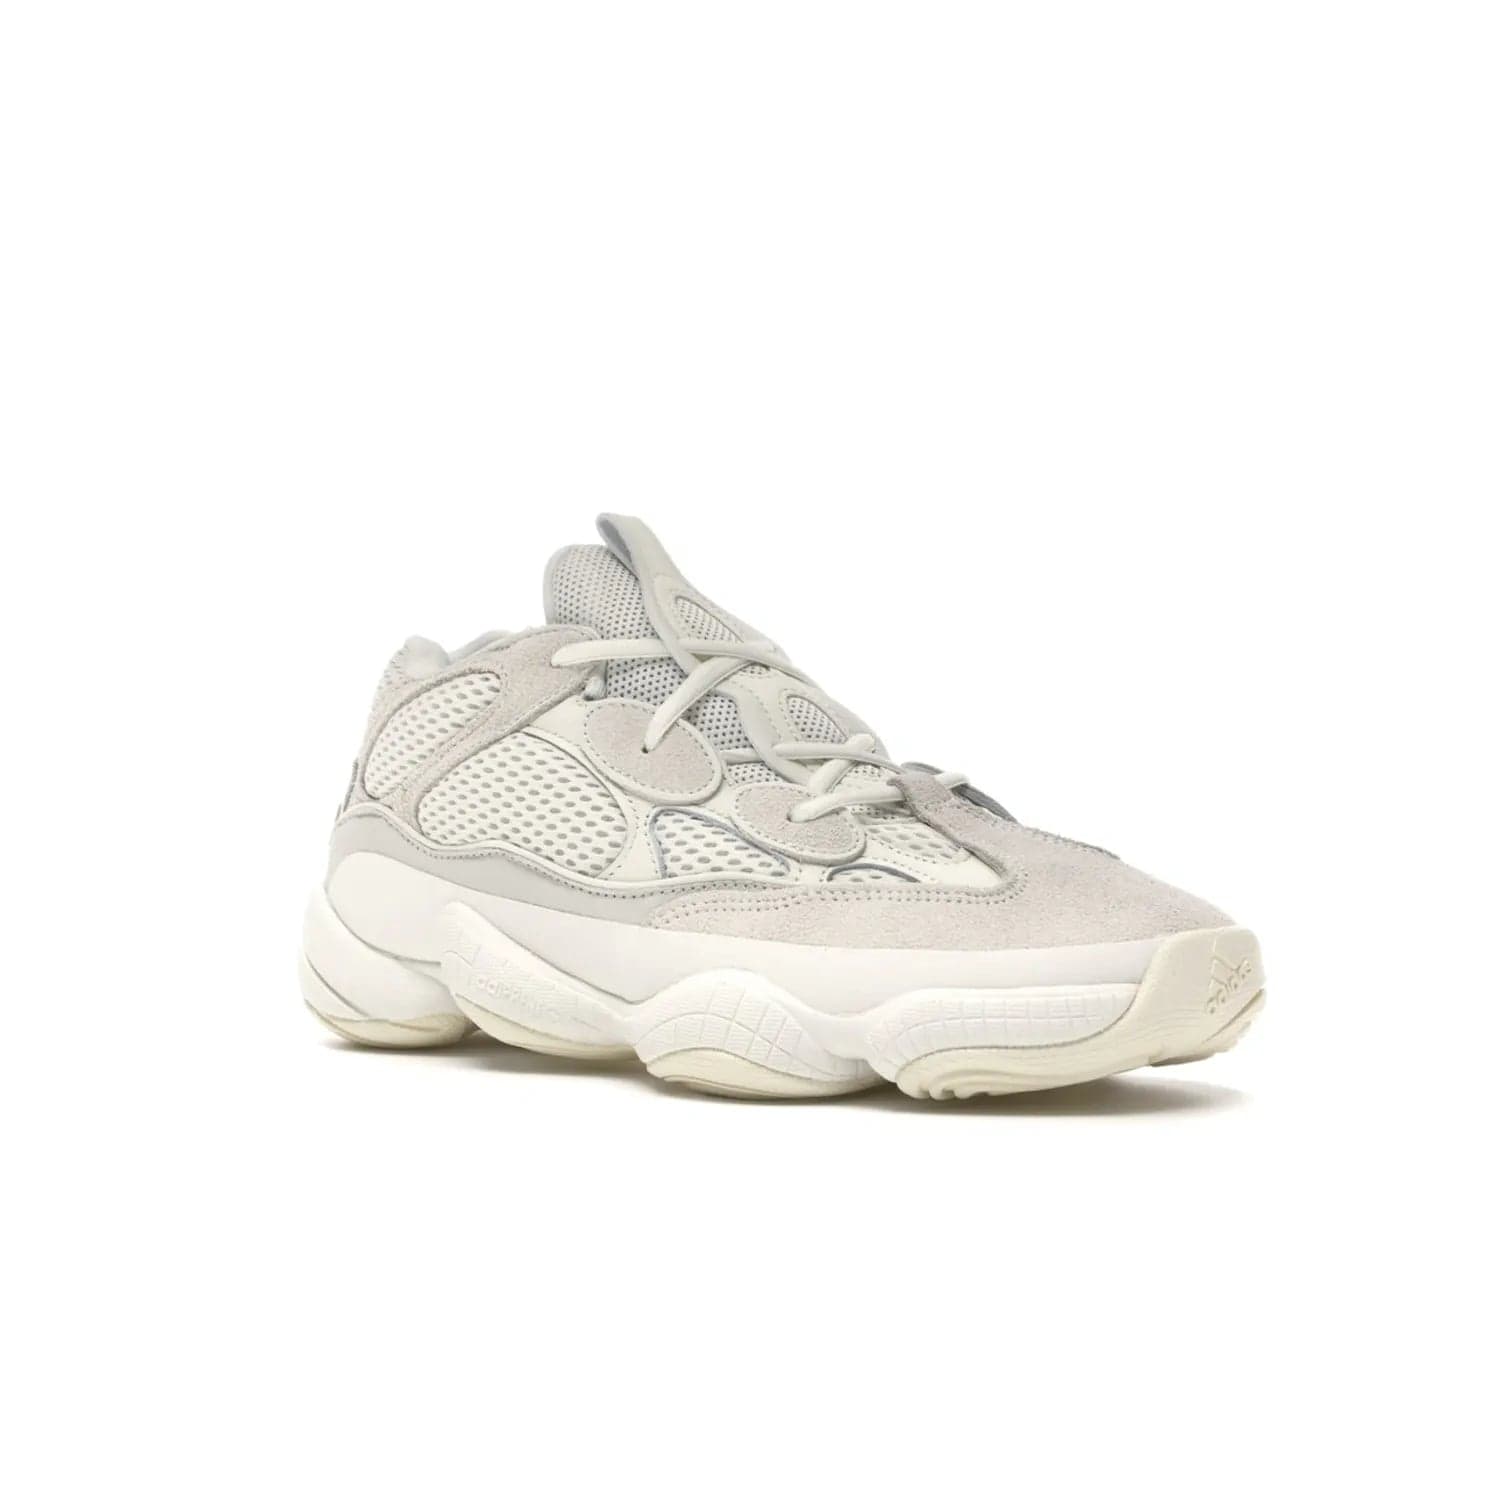 adidas Yeezy 500 Bone White - Image 5 - Only at www.BallersClubKickz.com - Classic look perfect for any sneaker collection. The adidas Yeezy 500 "Bone White" blends a white mesh upper with suede overlays & a chunky midsole inspired by the Adidas KB3. Complimented by a tonal-cream outsole, this timeless style is a must-have.